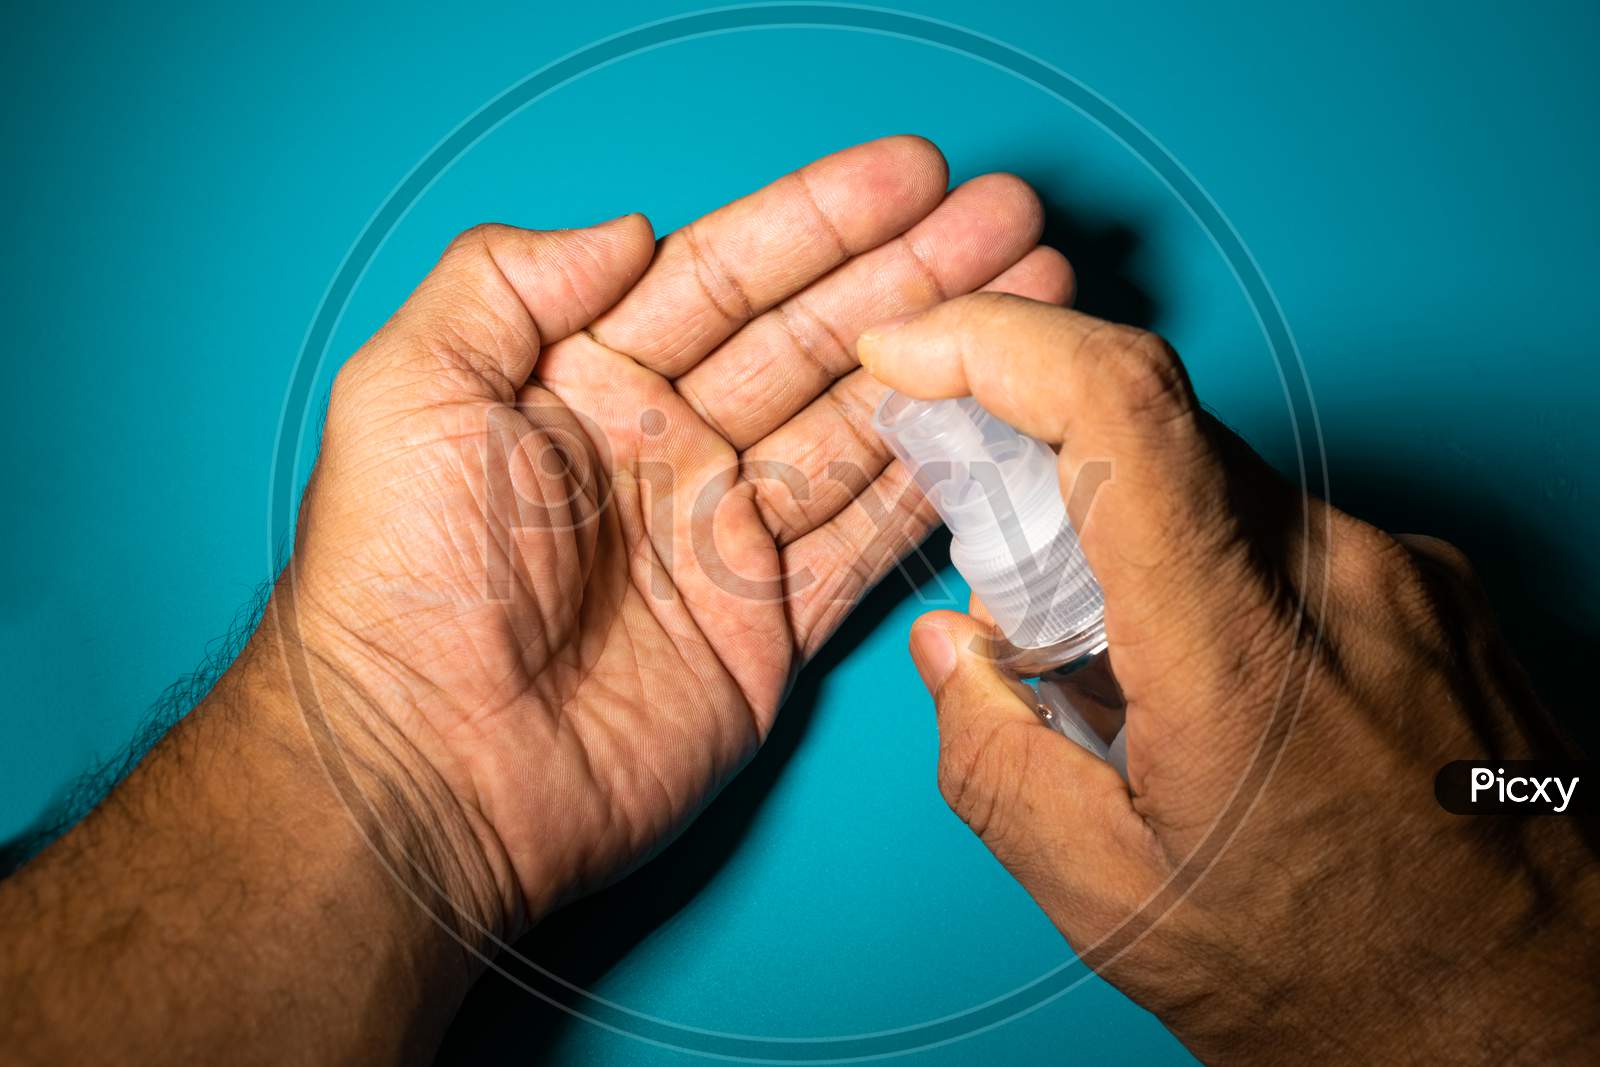 A Man Cleaning His Hand With Sanitizer To Prevent From Corona Virus, Covid 19